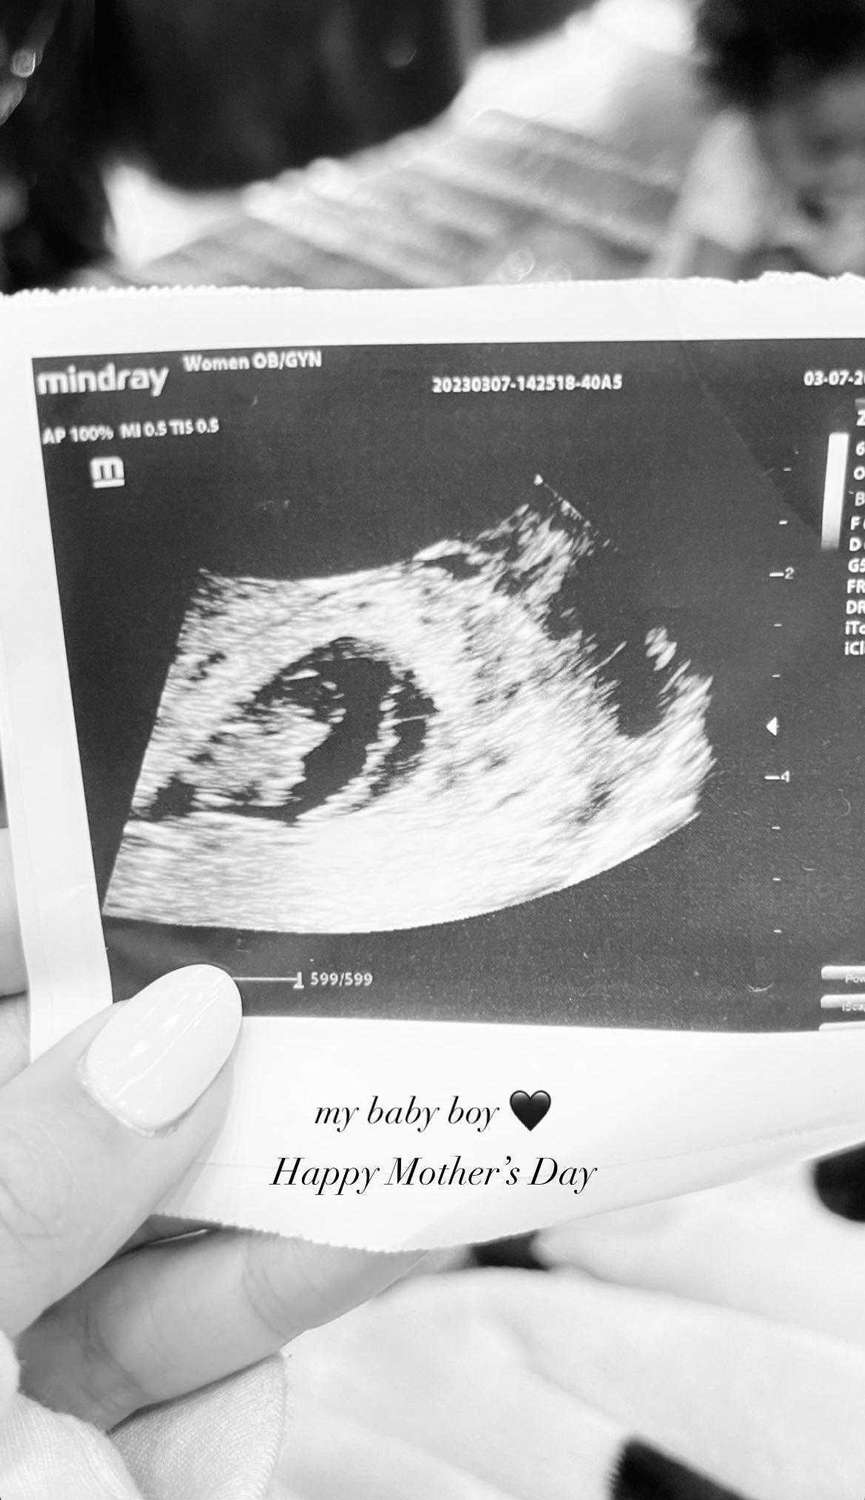 Alexis Gale/instagram Alexis Gale holds ultrasound photo